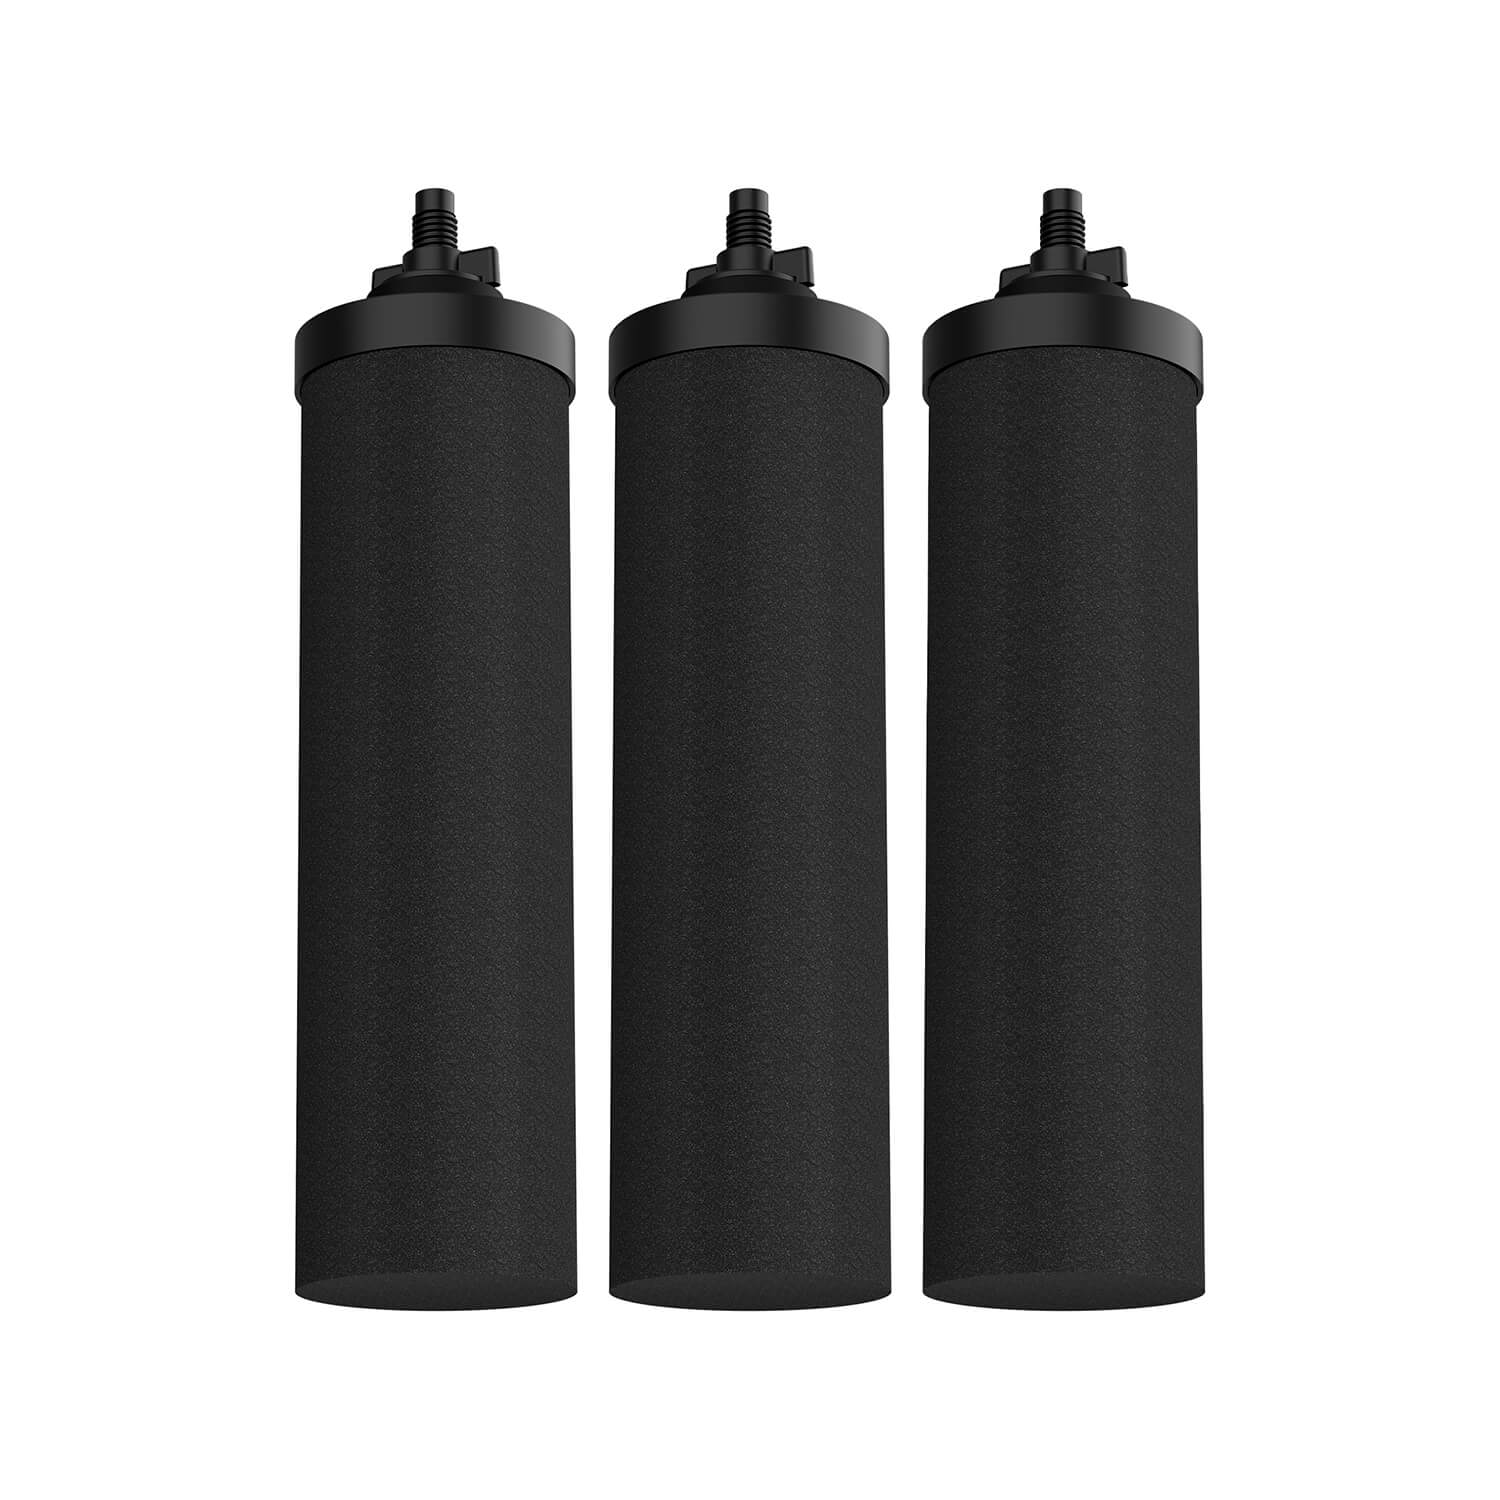 U3 Gravity-fed Water Filter Replacement Compatible for Black Berkey